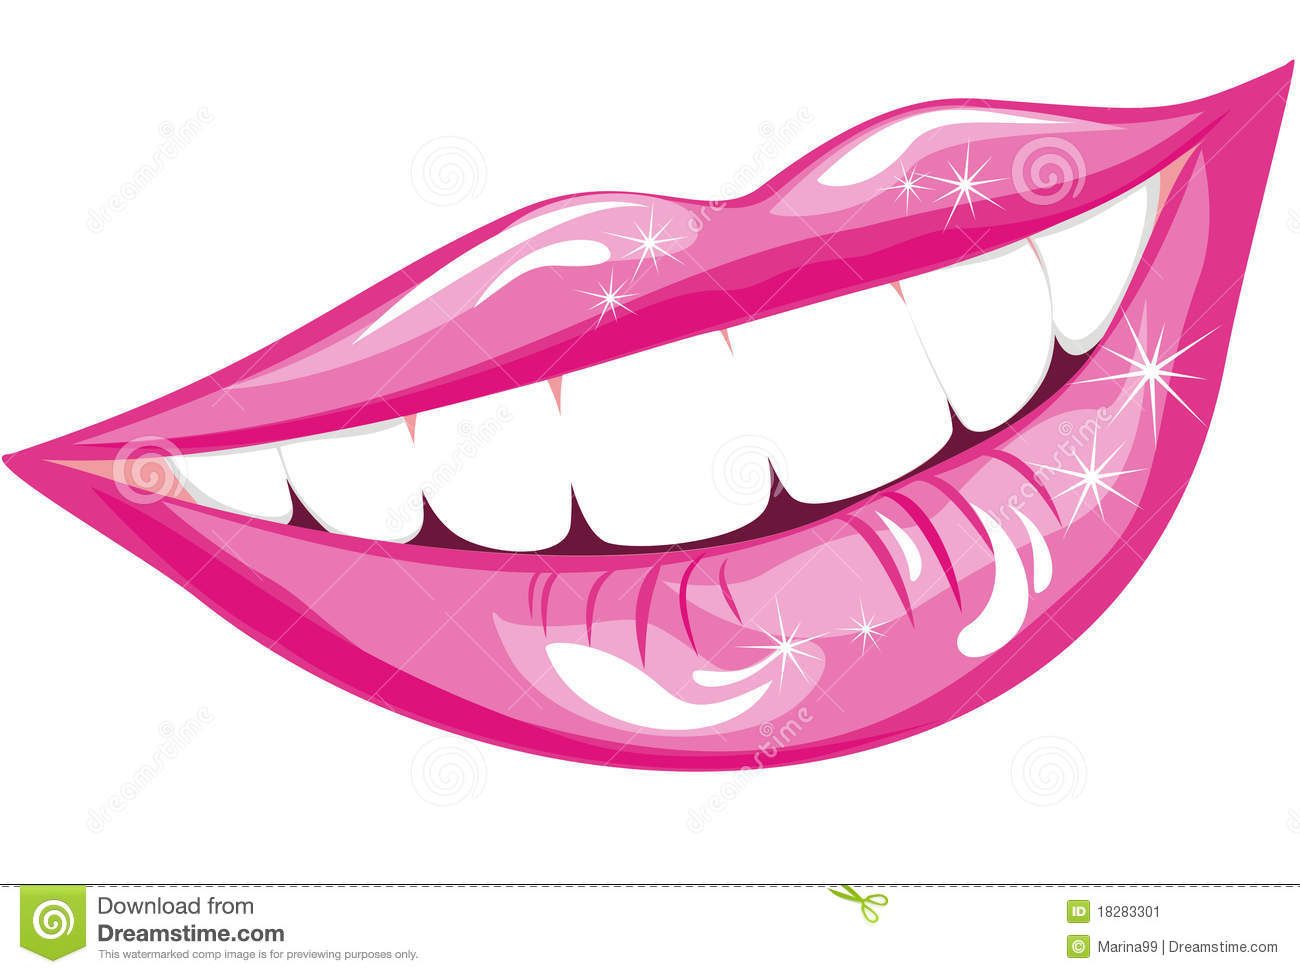 Closed Mouth Smile Clipart Healthy Smile Closed Lips And A Smiling